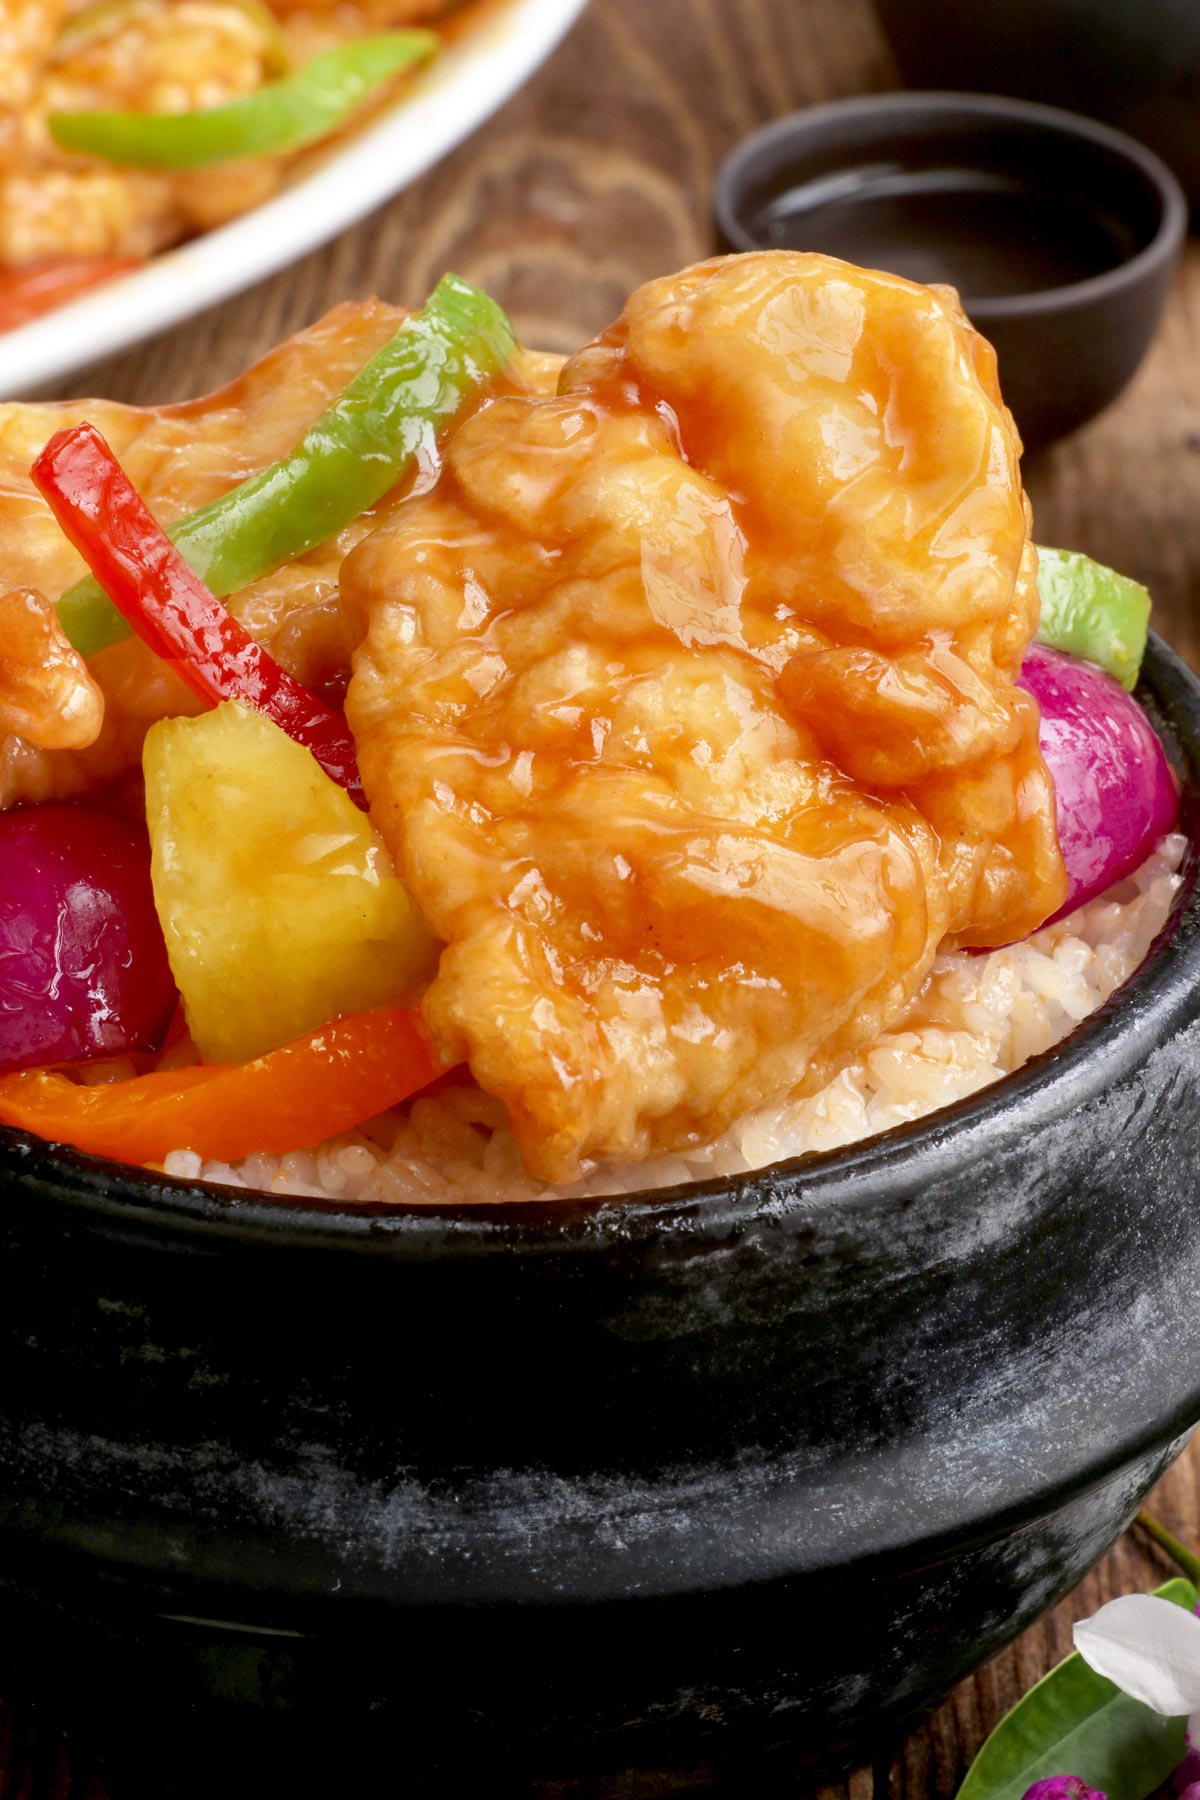 Rice topped with freshly cooked sweet and sour fish fillet with bell pepper strips and pineapple chunks.